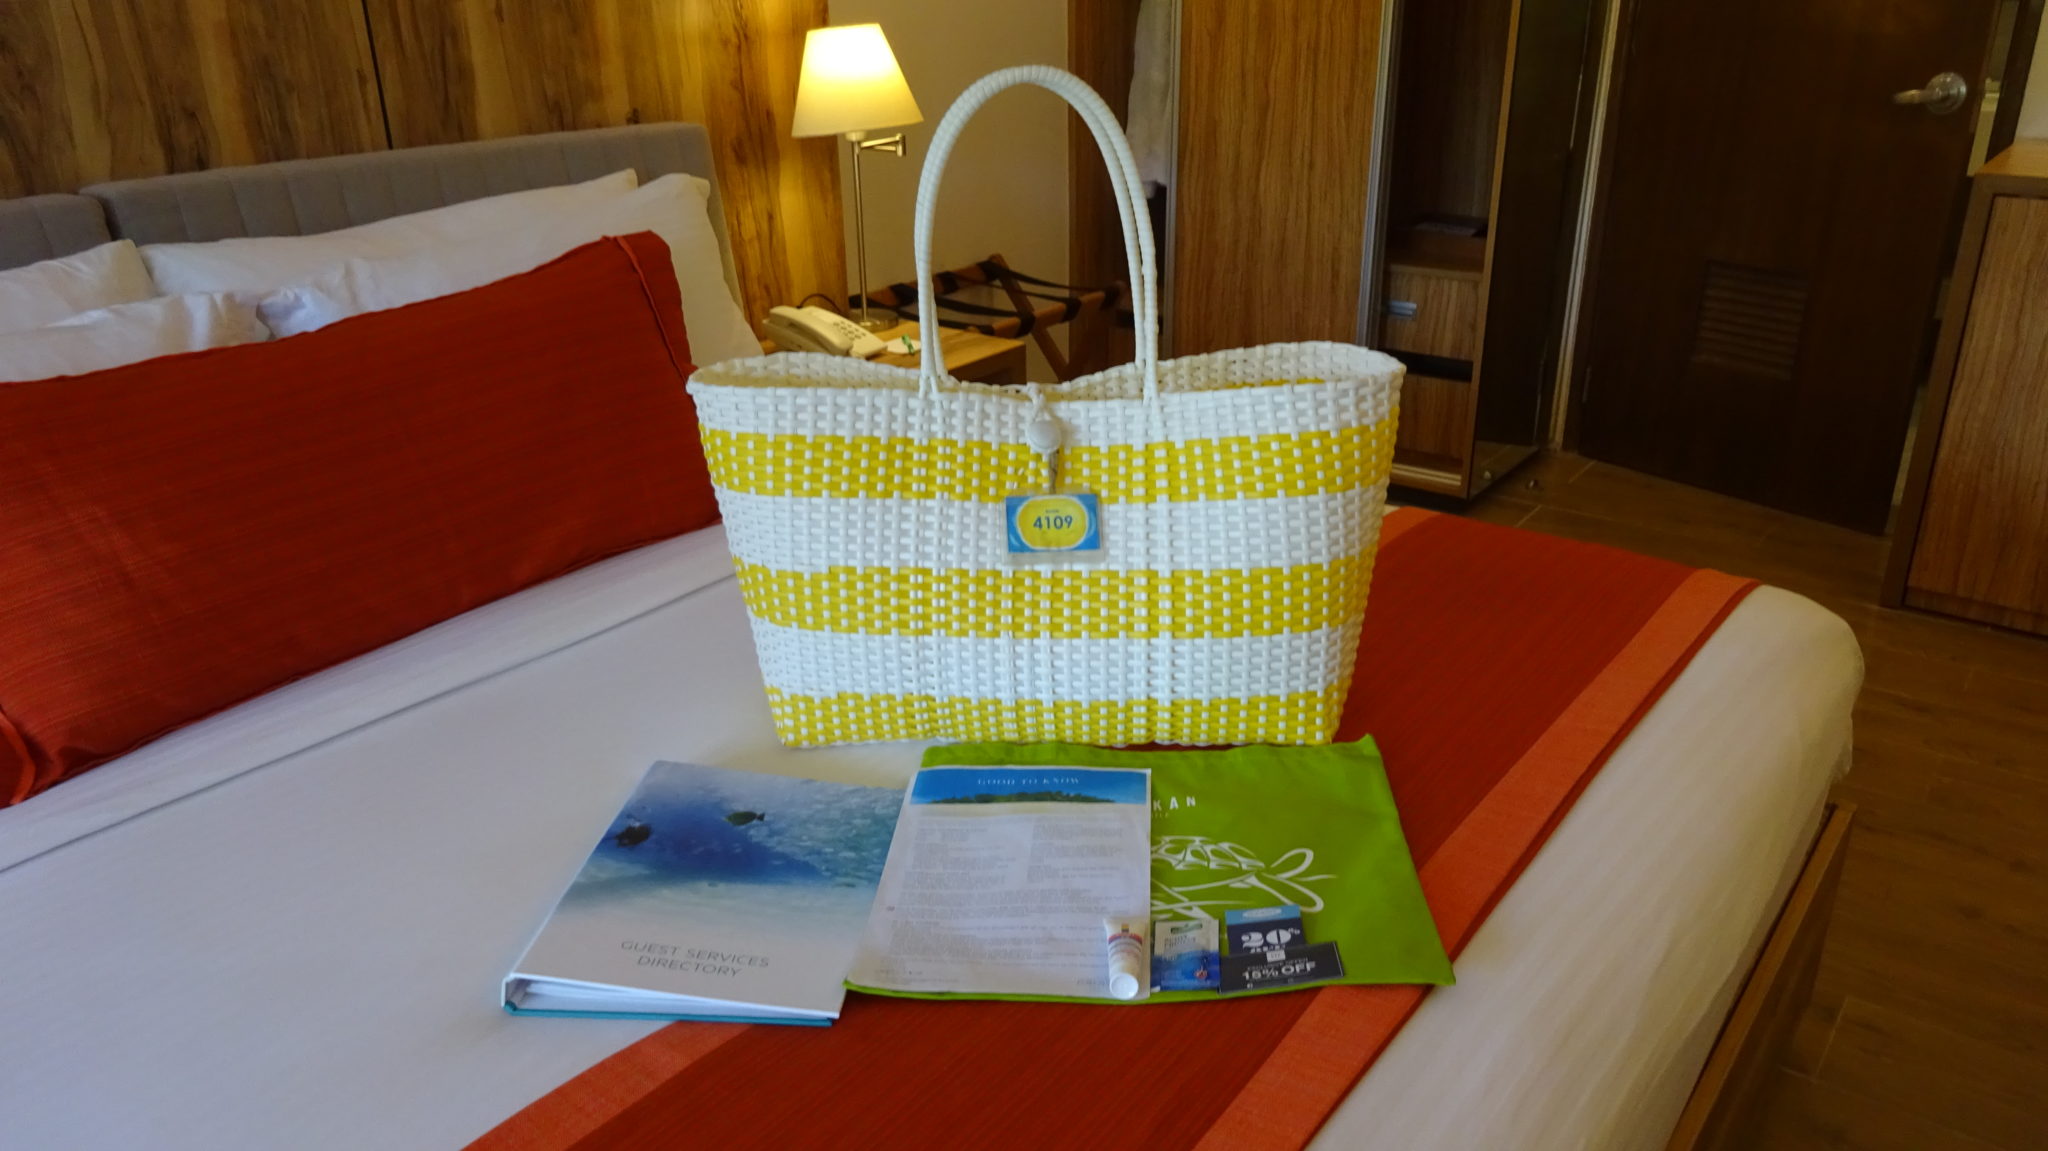 A yellow and white striped beach bag, a green tote bag and an A4 folder on a bed